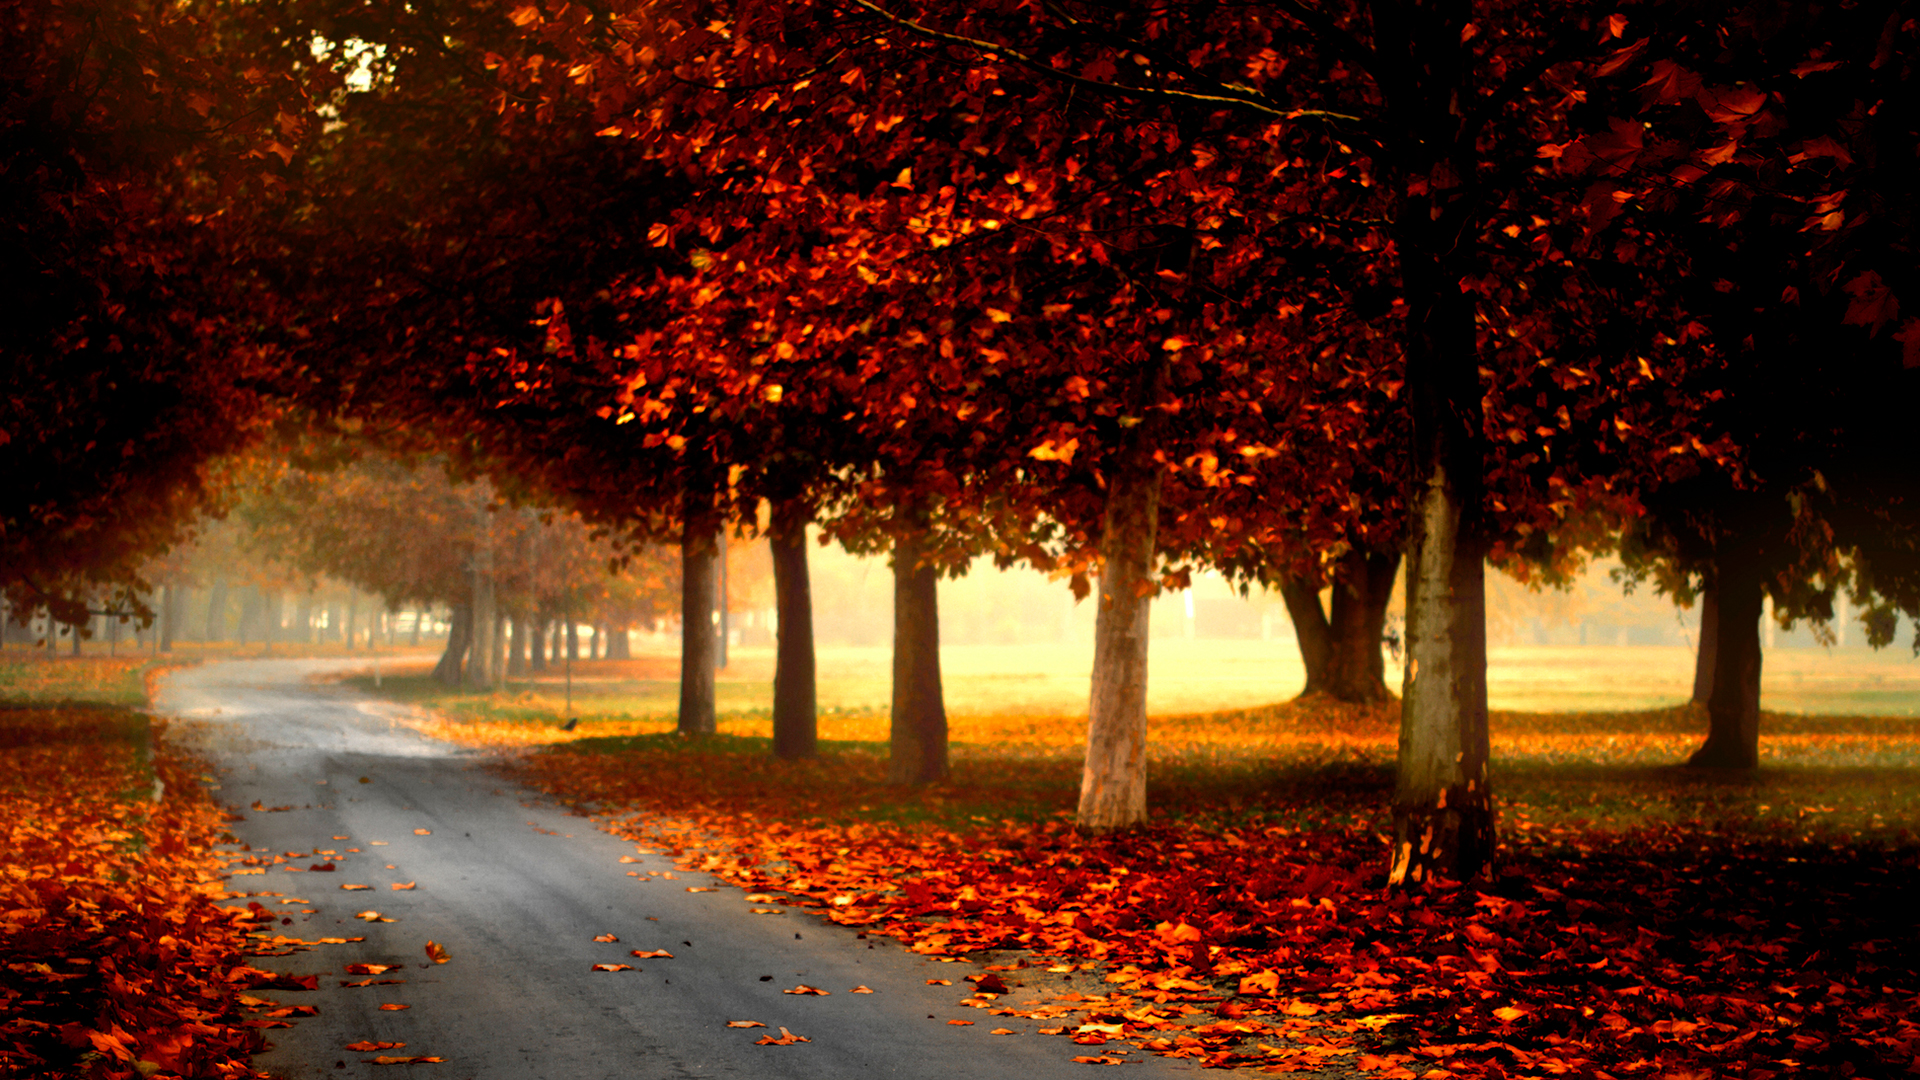 Fall Background Pictures For Desktop